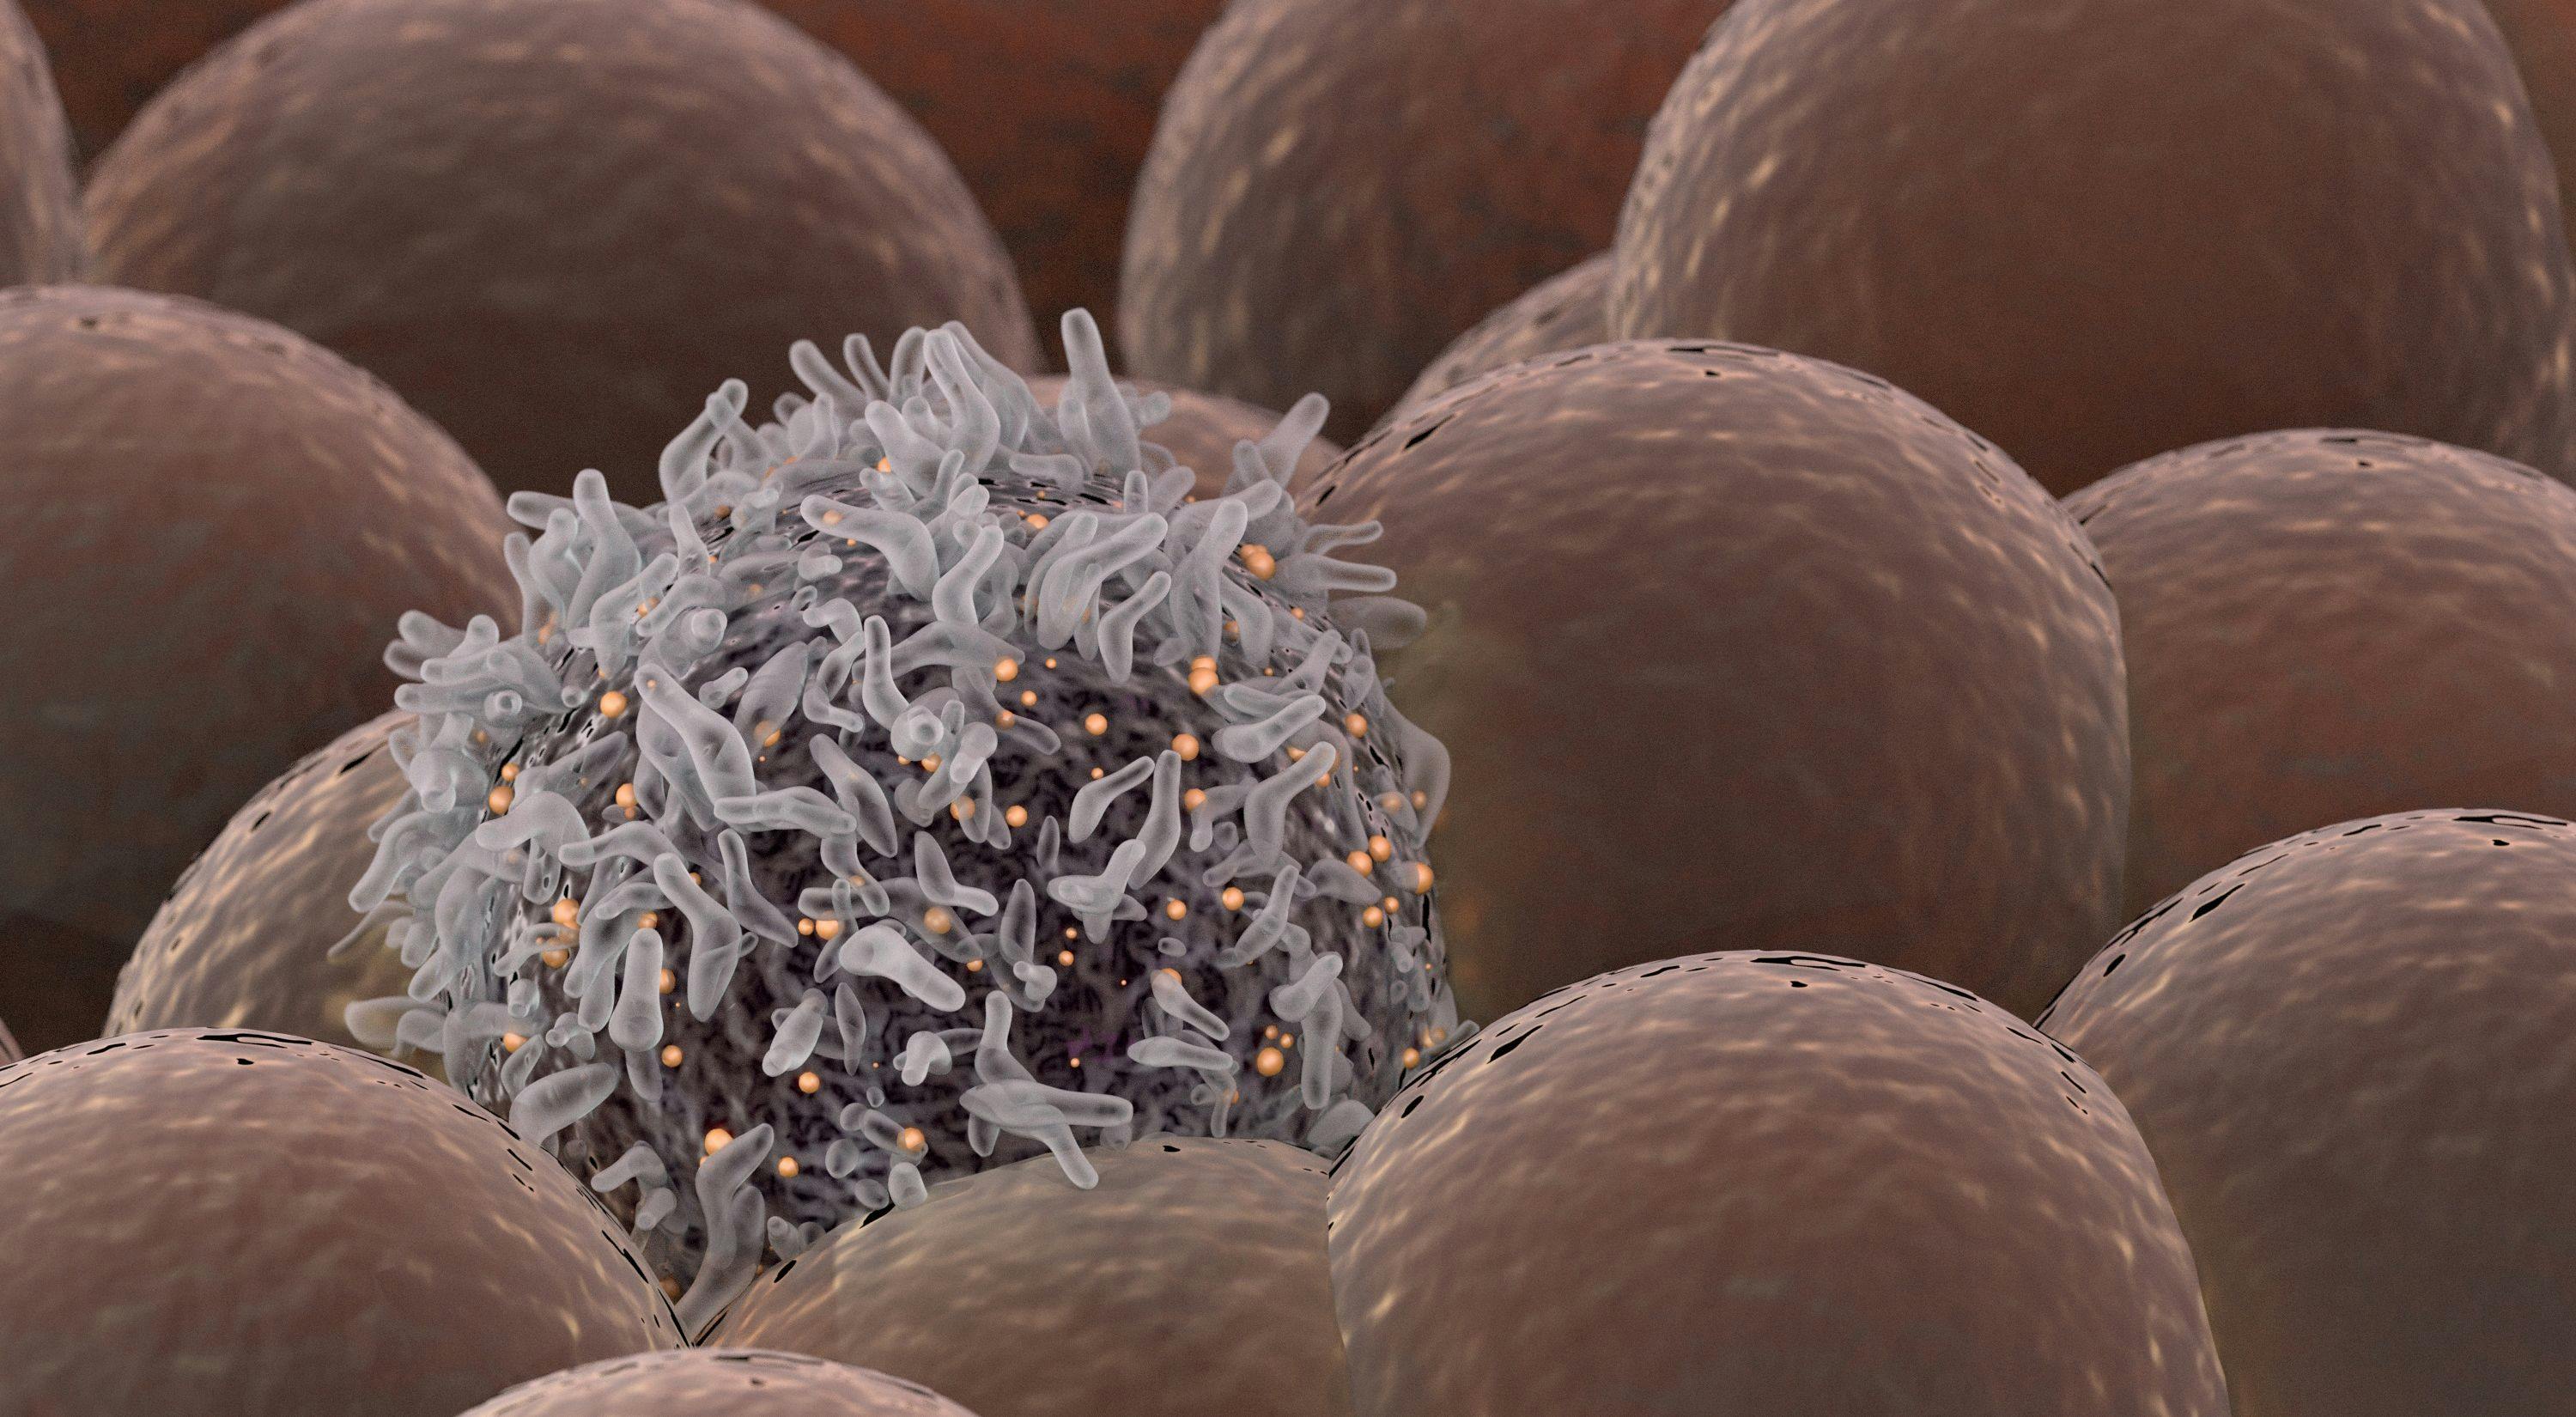 Only Certain Gynecologic Malignancies Benefit from Immunotherapy